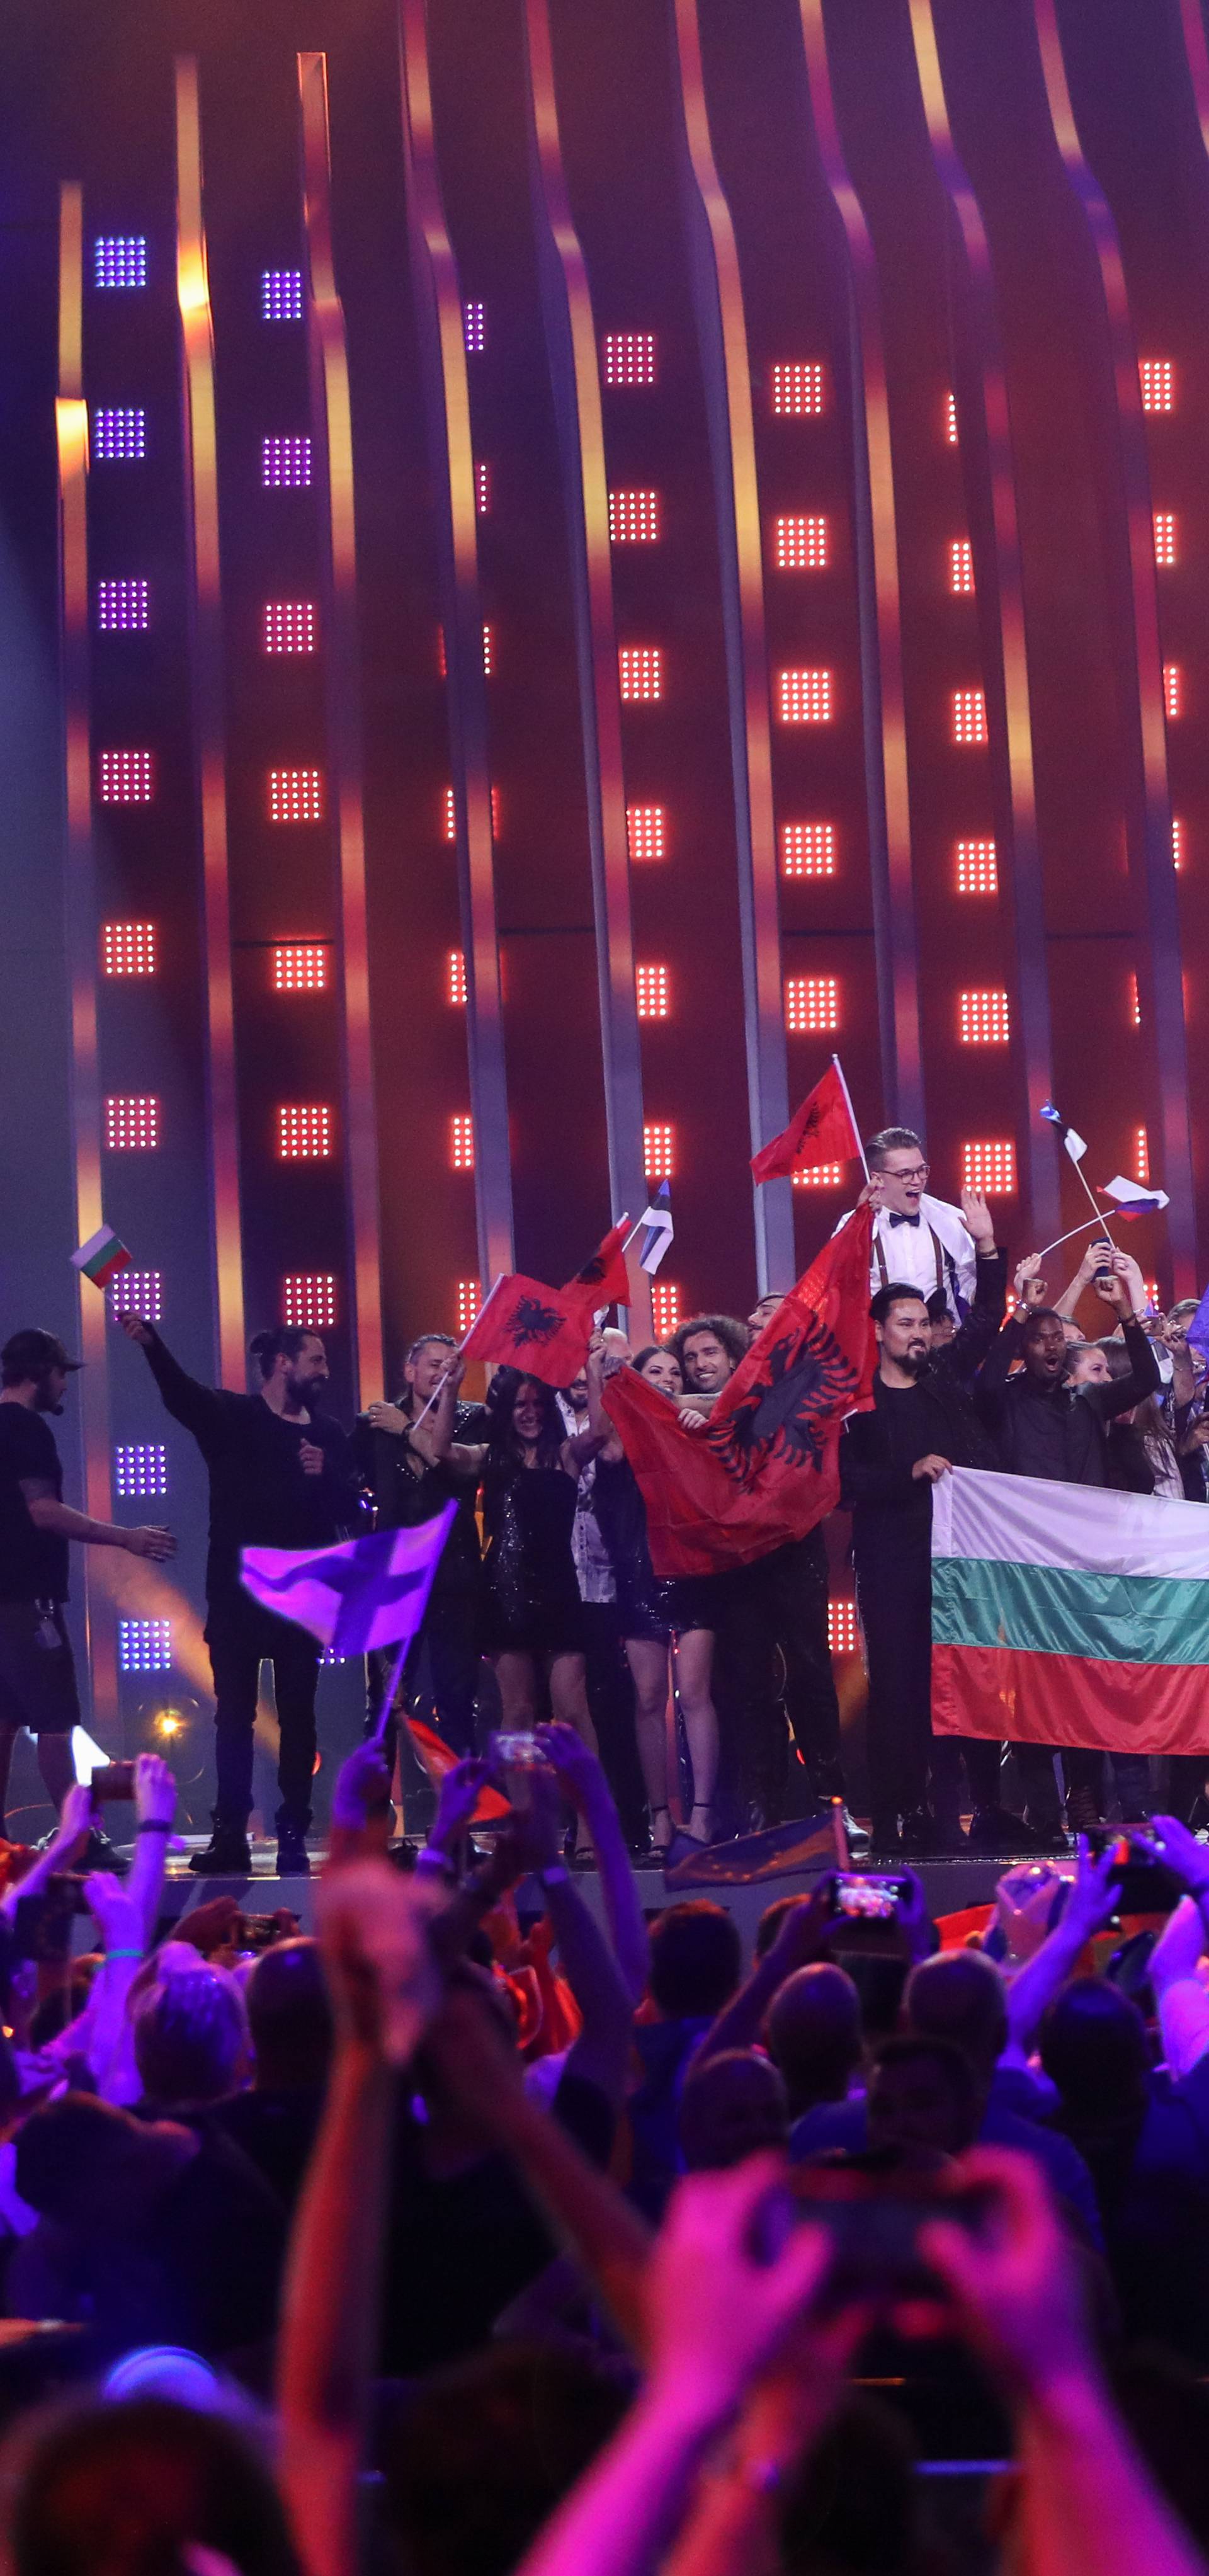 Eurovision Song Contest 2018 - first semifinals